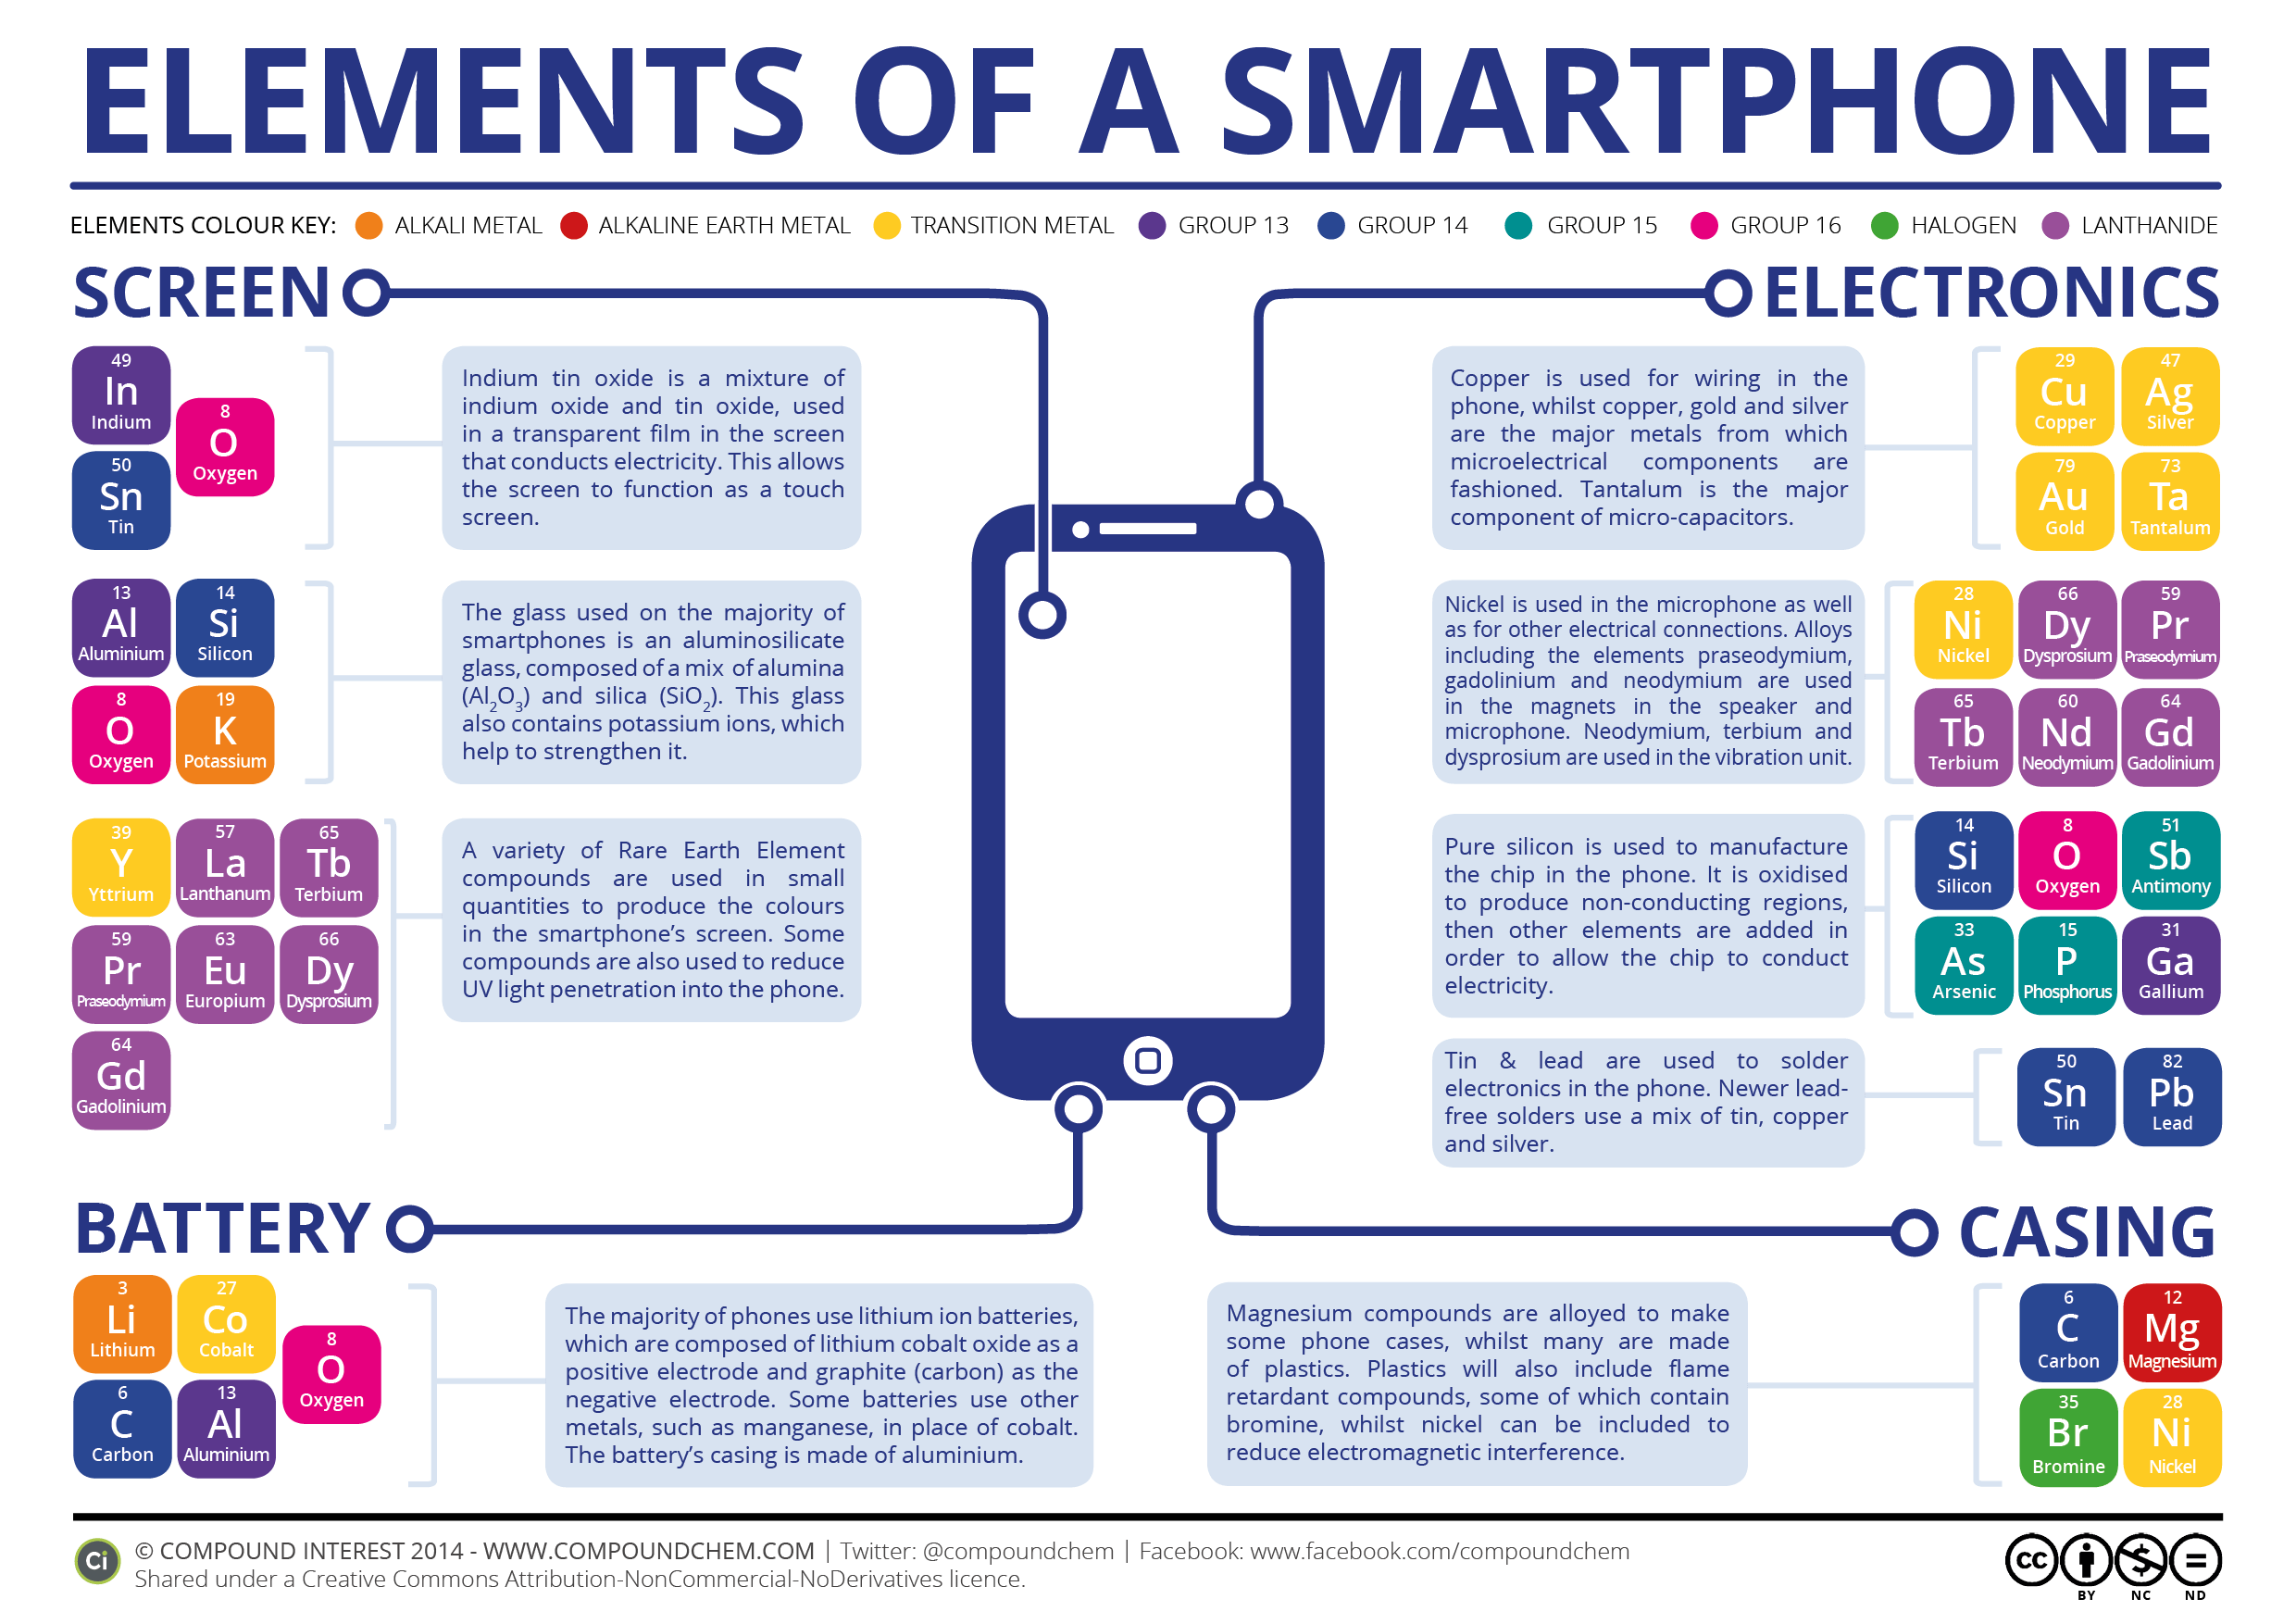 Compound Interest - The Chemical Elements of a Smartphone